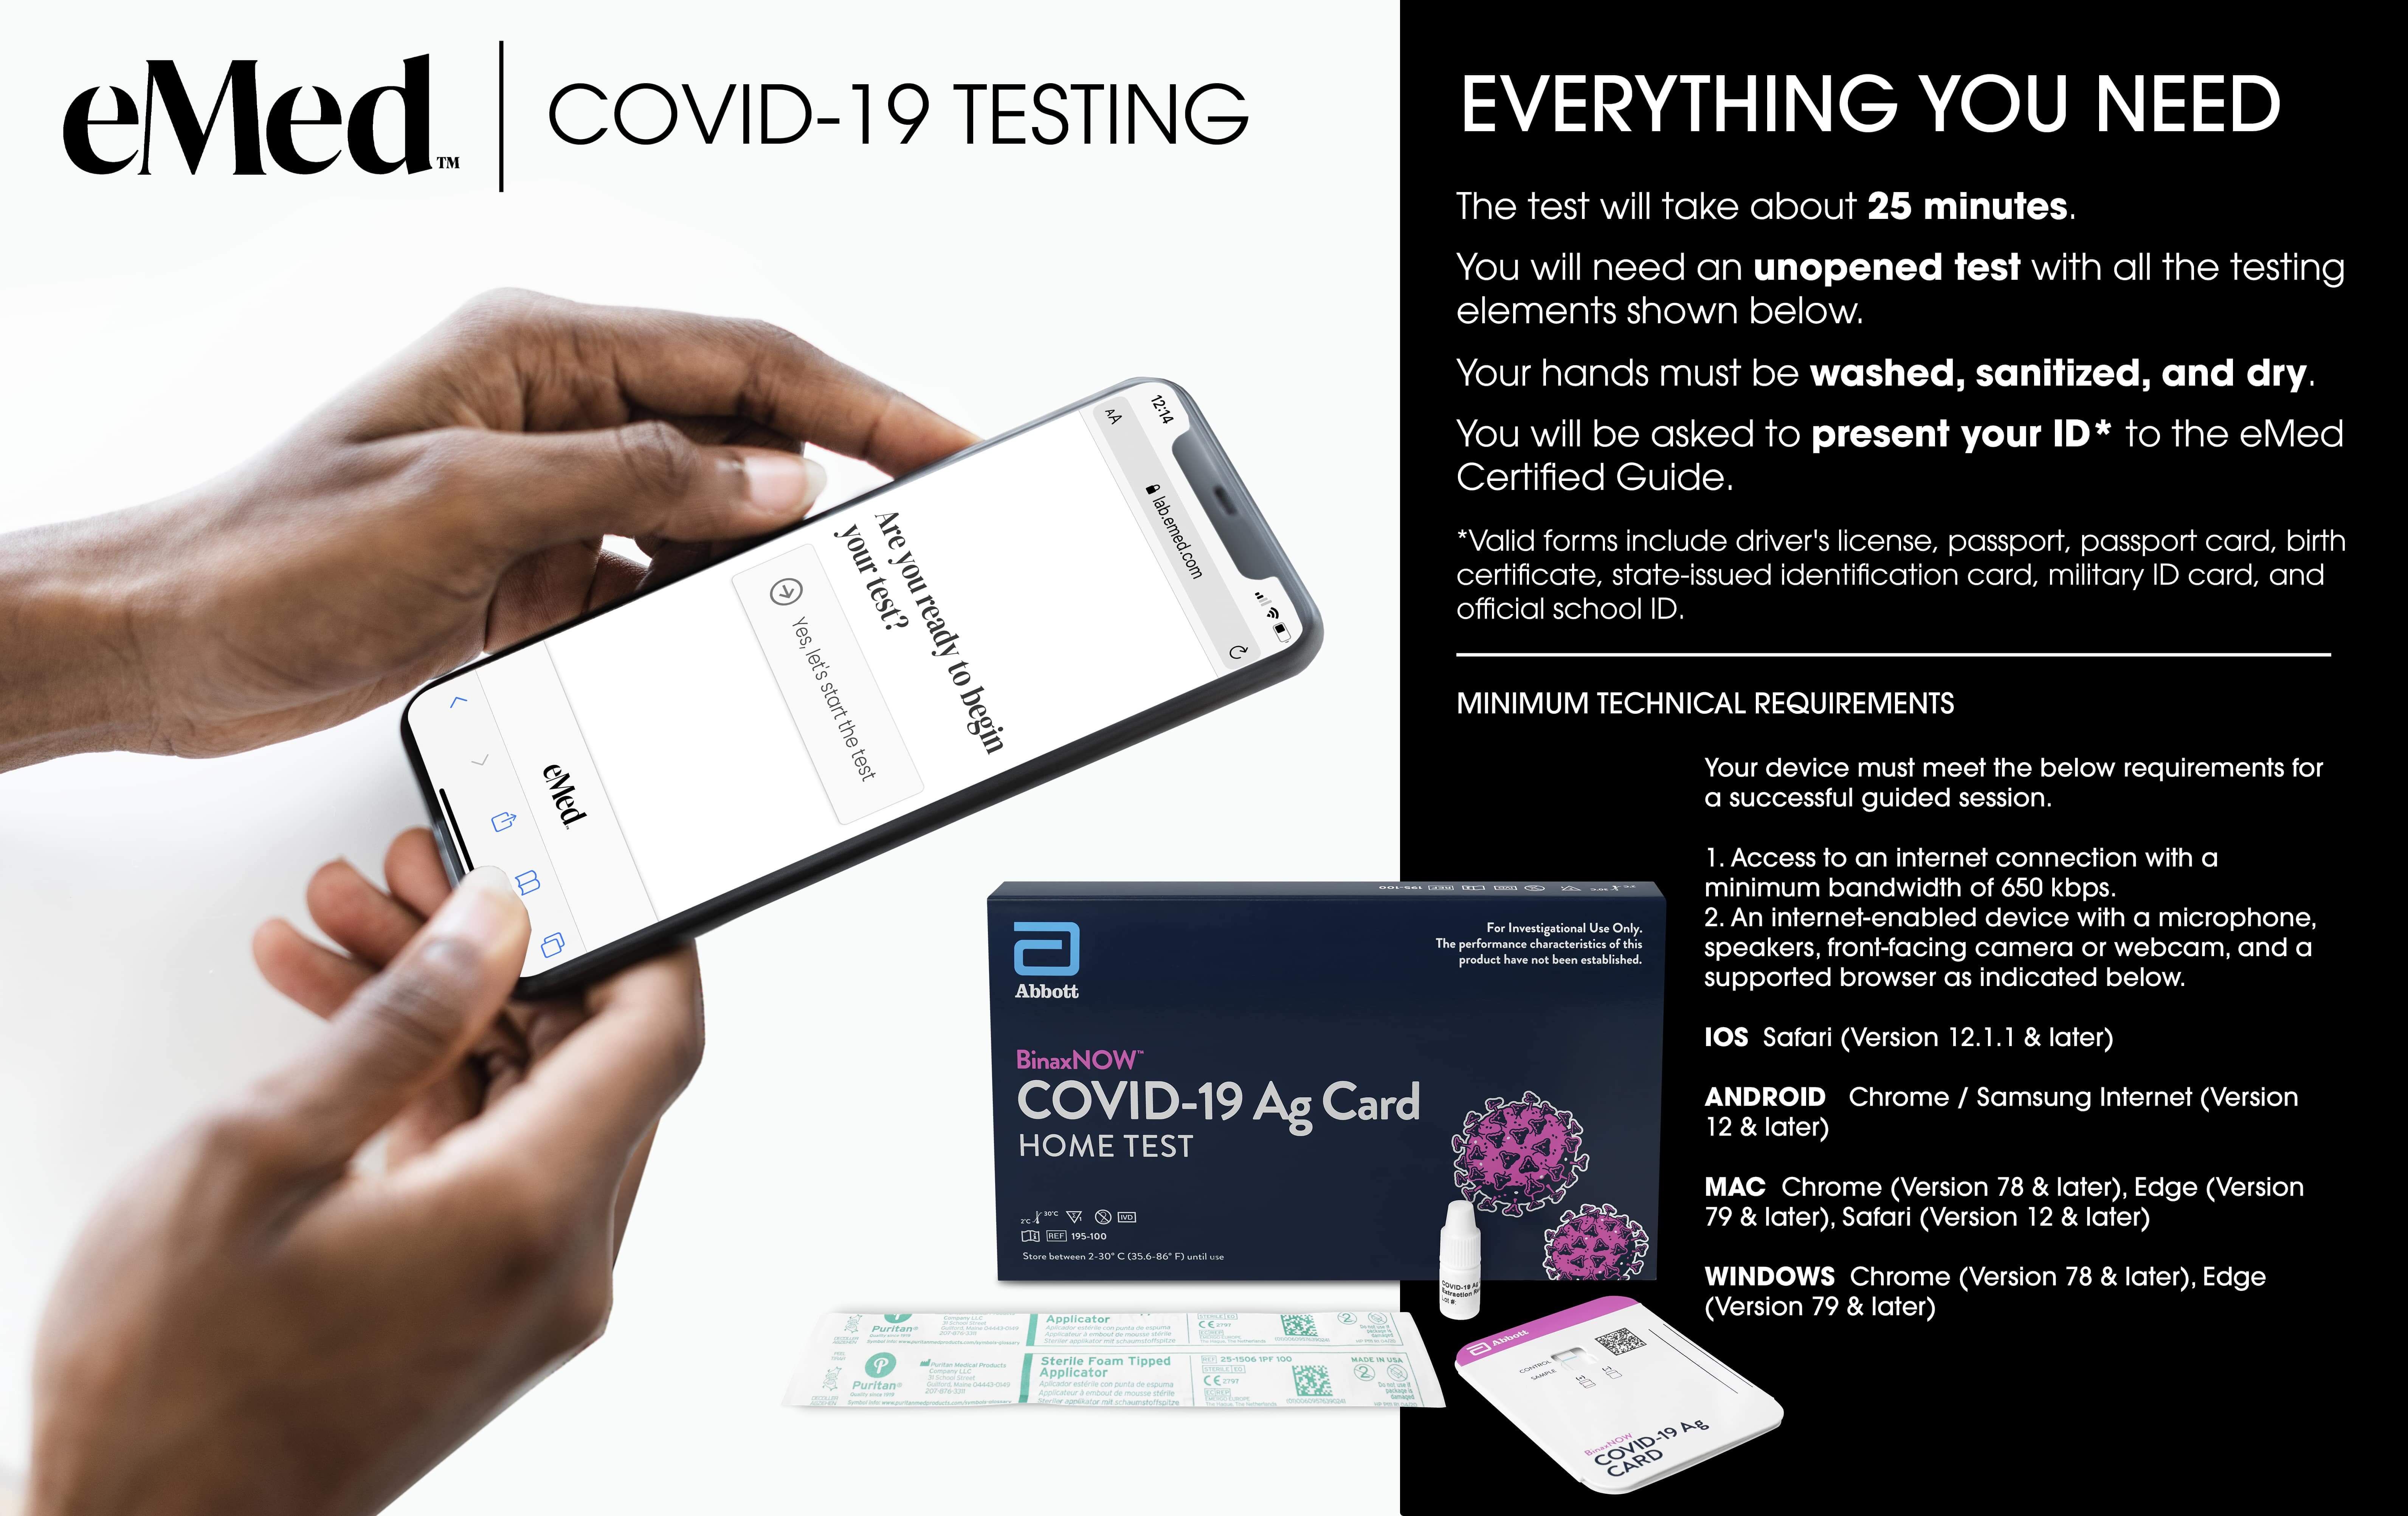 Abbott BinaxNOW™ COVID-19 Antigen Card Home Test with eMed Telehealth Services - 1 Pack for Royal Caribbean